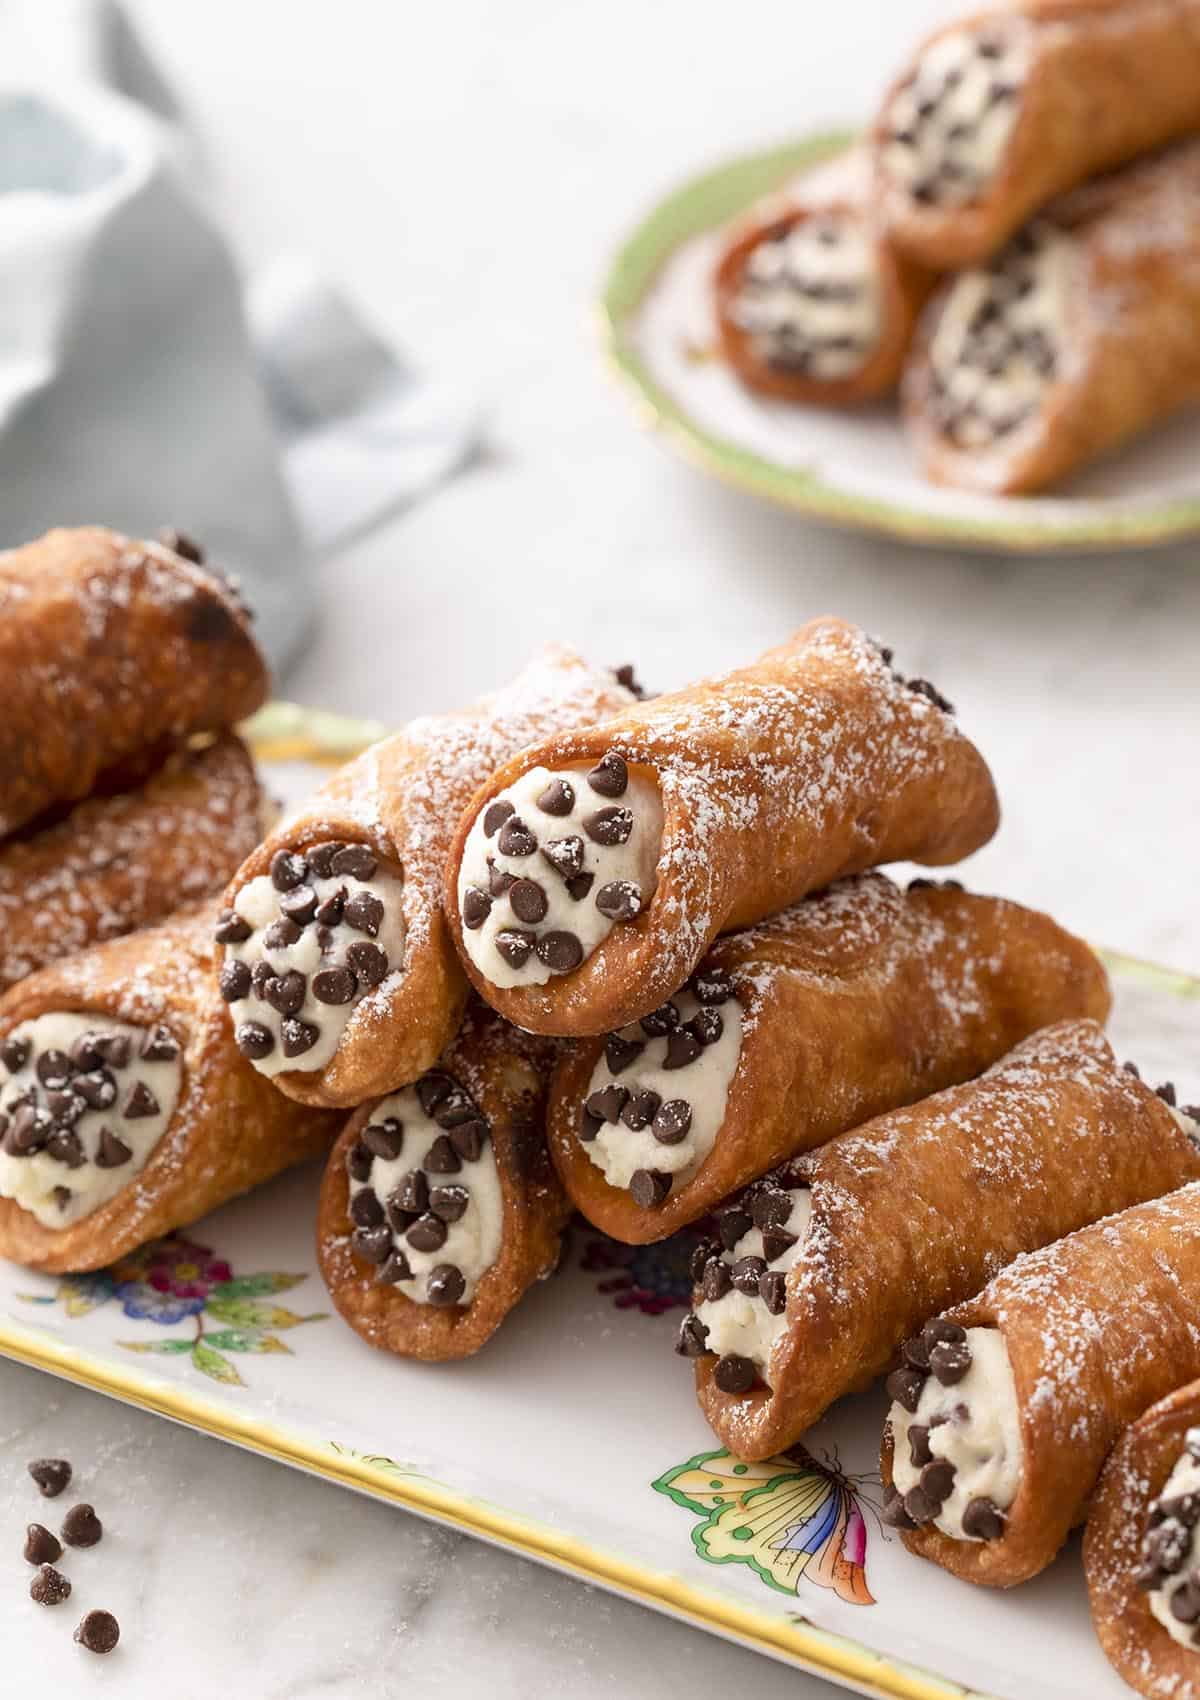 A pile of cannoli on a porcelain tray.